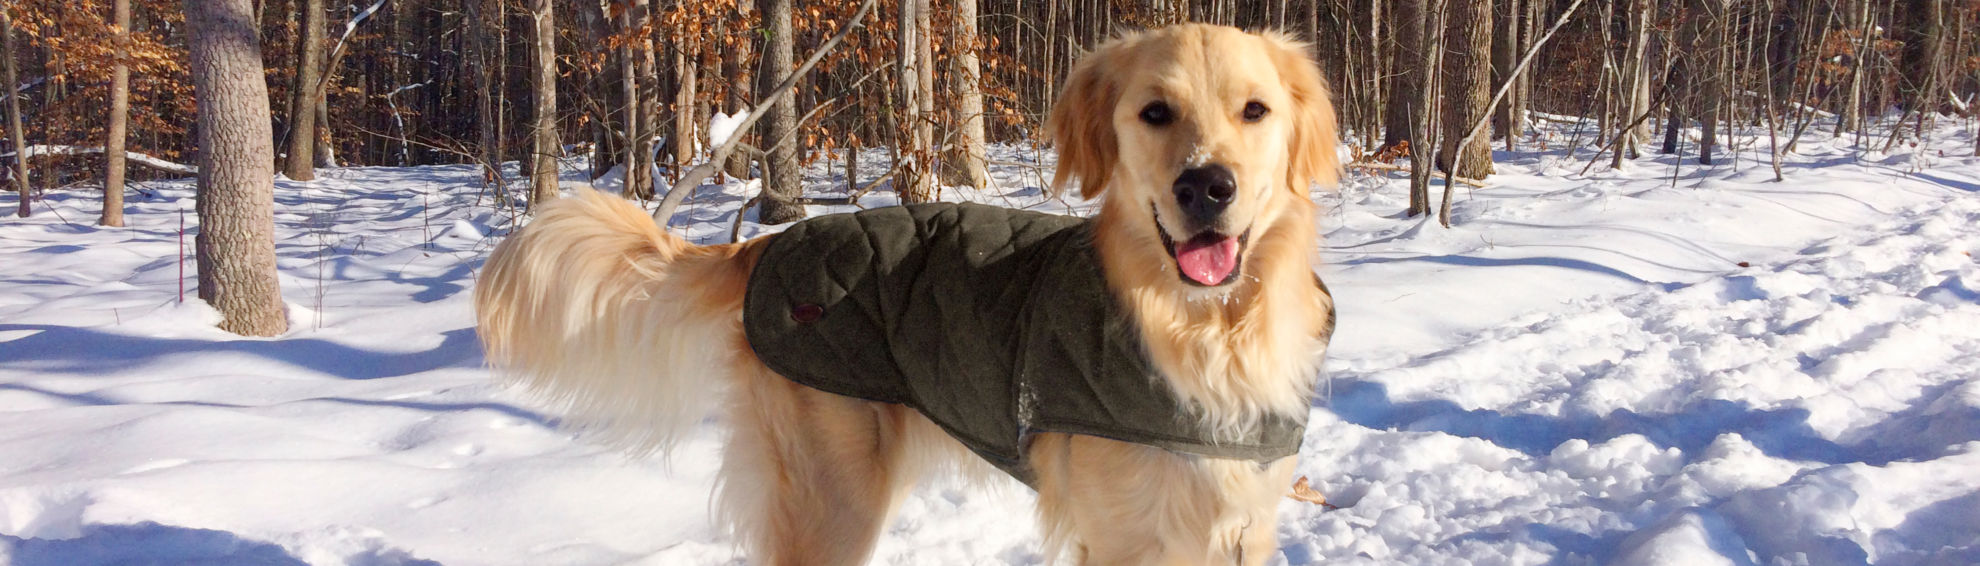 A golden retriever standing in the snowy woods wearing a jacket